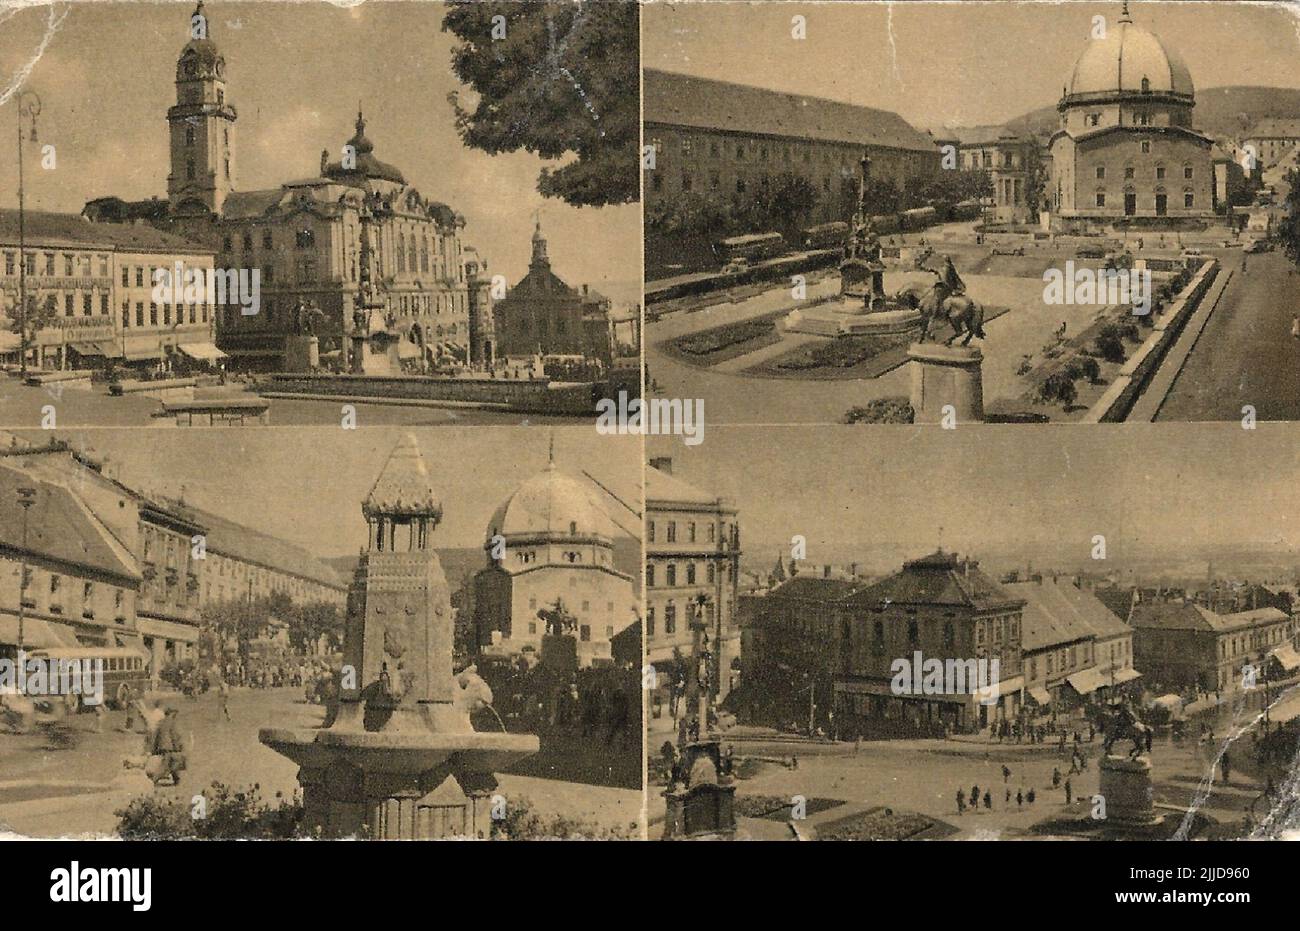 Image compilation of Széchenyi Square in Pécs. Postcard of the sights of Pécs, including the Széchenyi Square. The Local History Collection of Csorba Gyz Könyvtár Library has been collecting photos and postcards related to Baranya County since January 1966. According to the data updated on 1st February 2016, the collection consists of 11,565 copies. As the result of the digitisation project that started in 2012, the Collection includes about 59,000 black-and-white and coloured records of different sizes and types, which are searchable through the electronic catalogue. The famous postcard colle Stock Photo